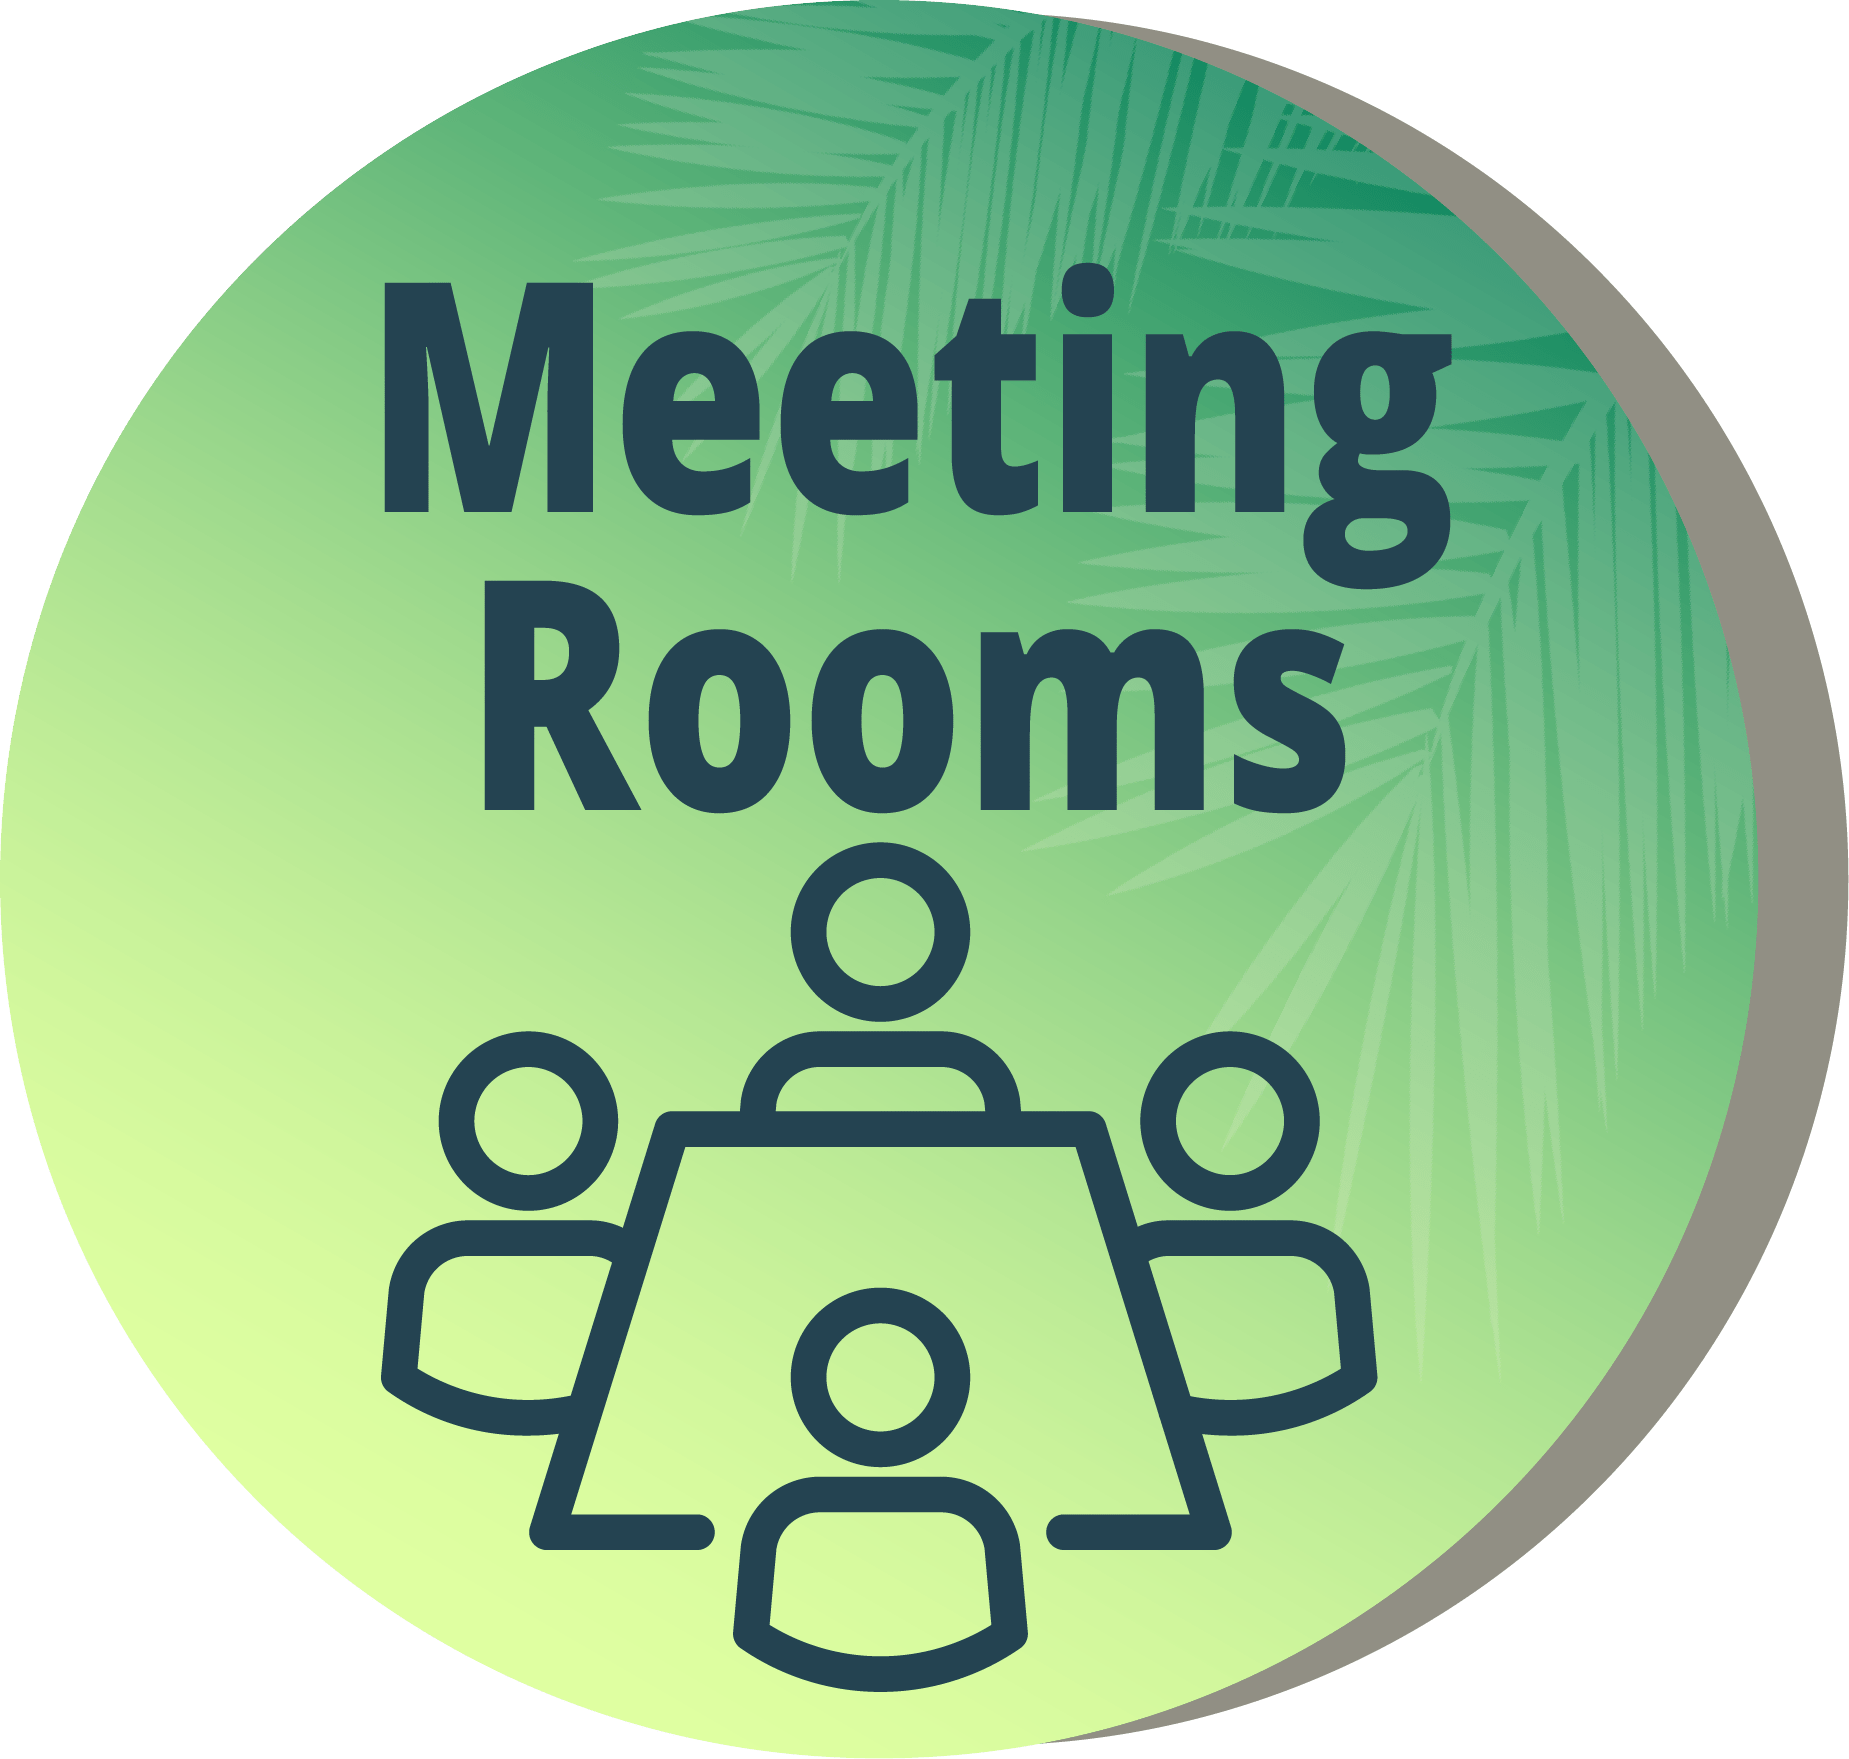 Access our meeting room booking service